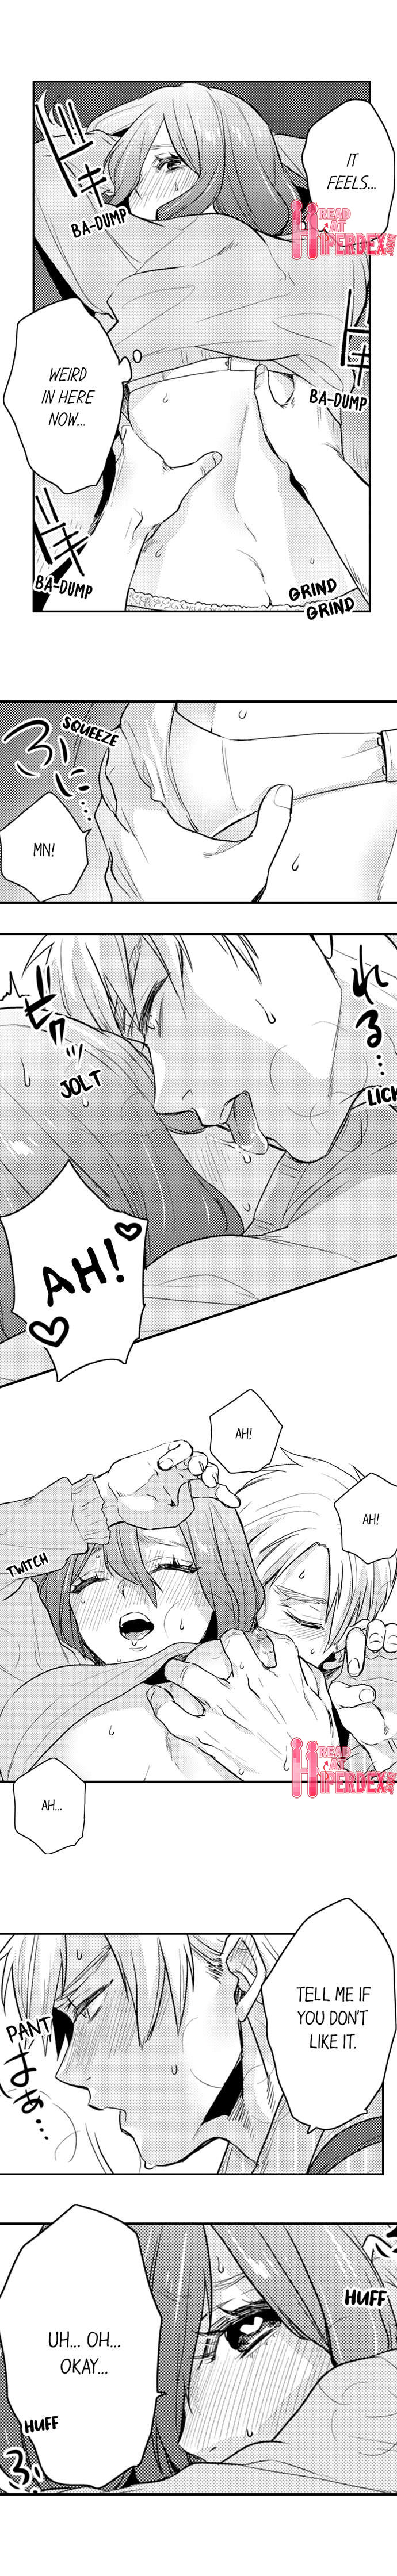 The Massage ♂♀ The Pleasure of Full Course Sex Chapter 4 - Page 6